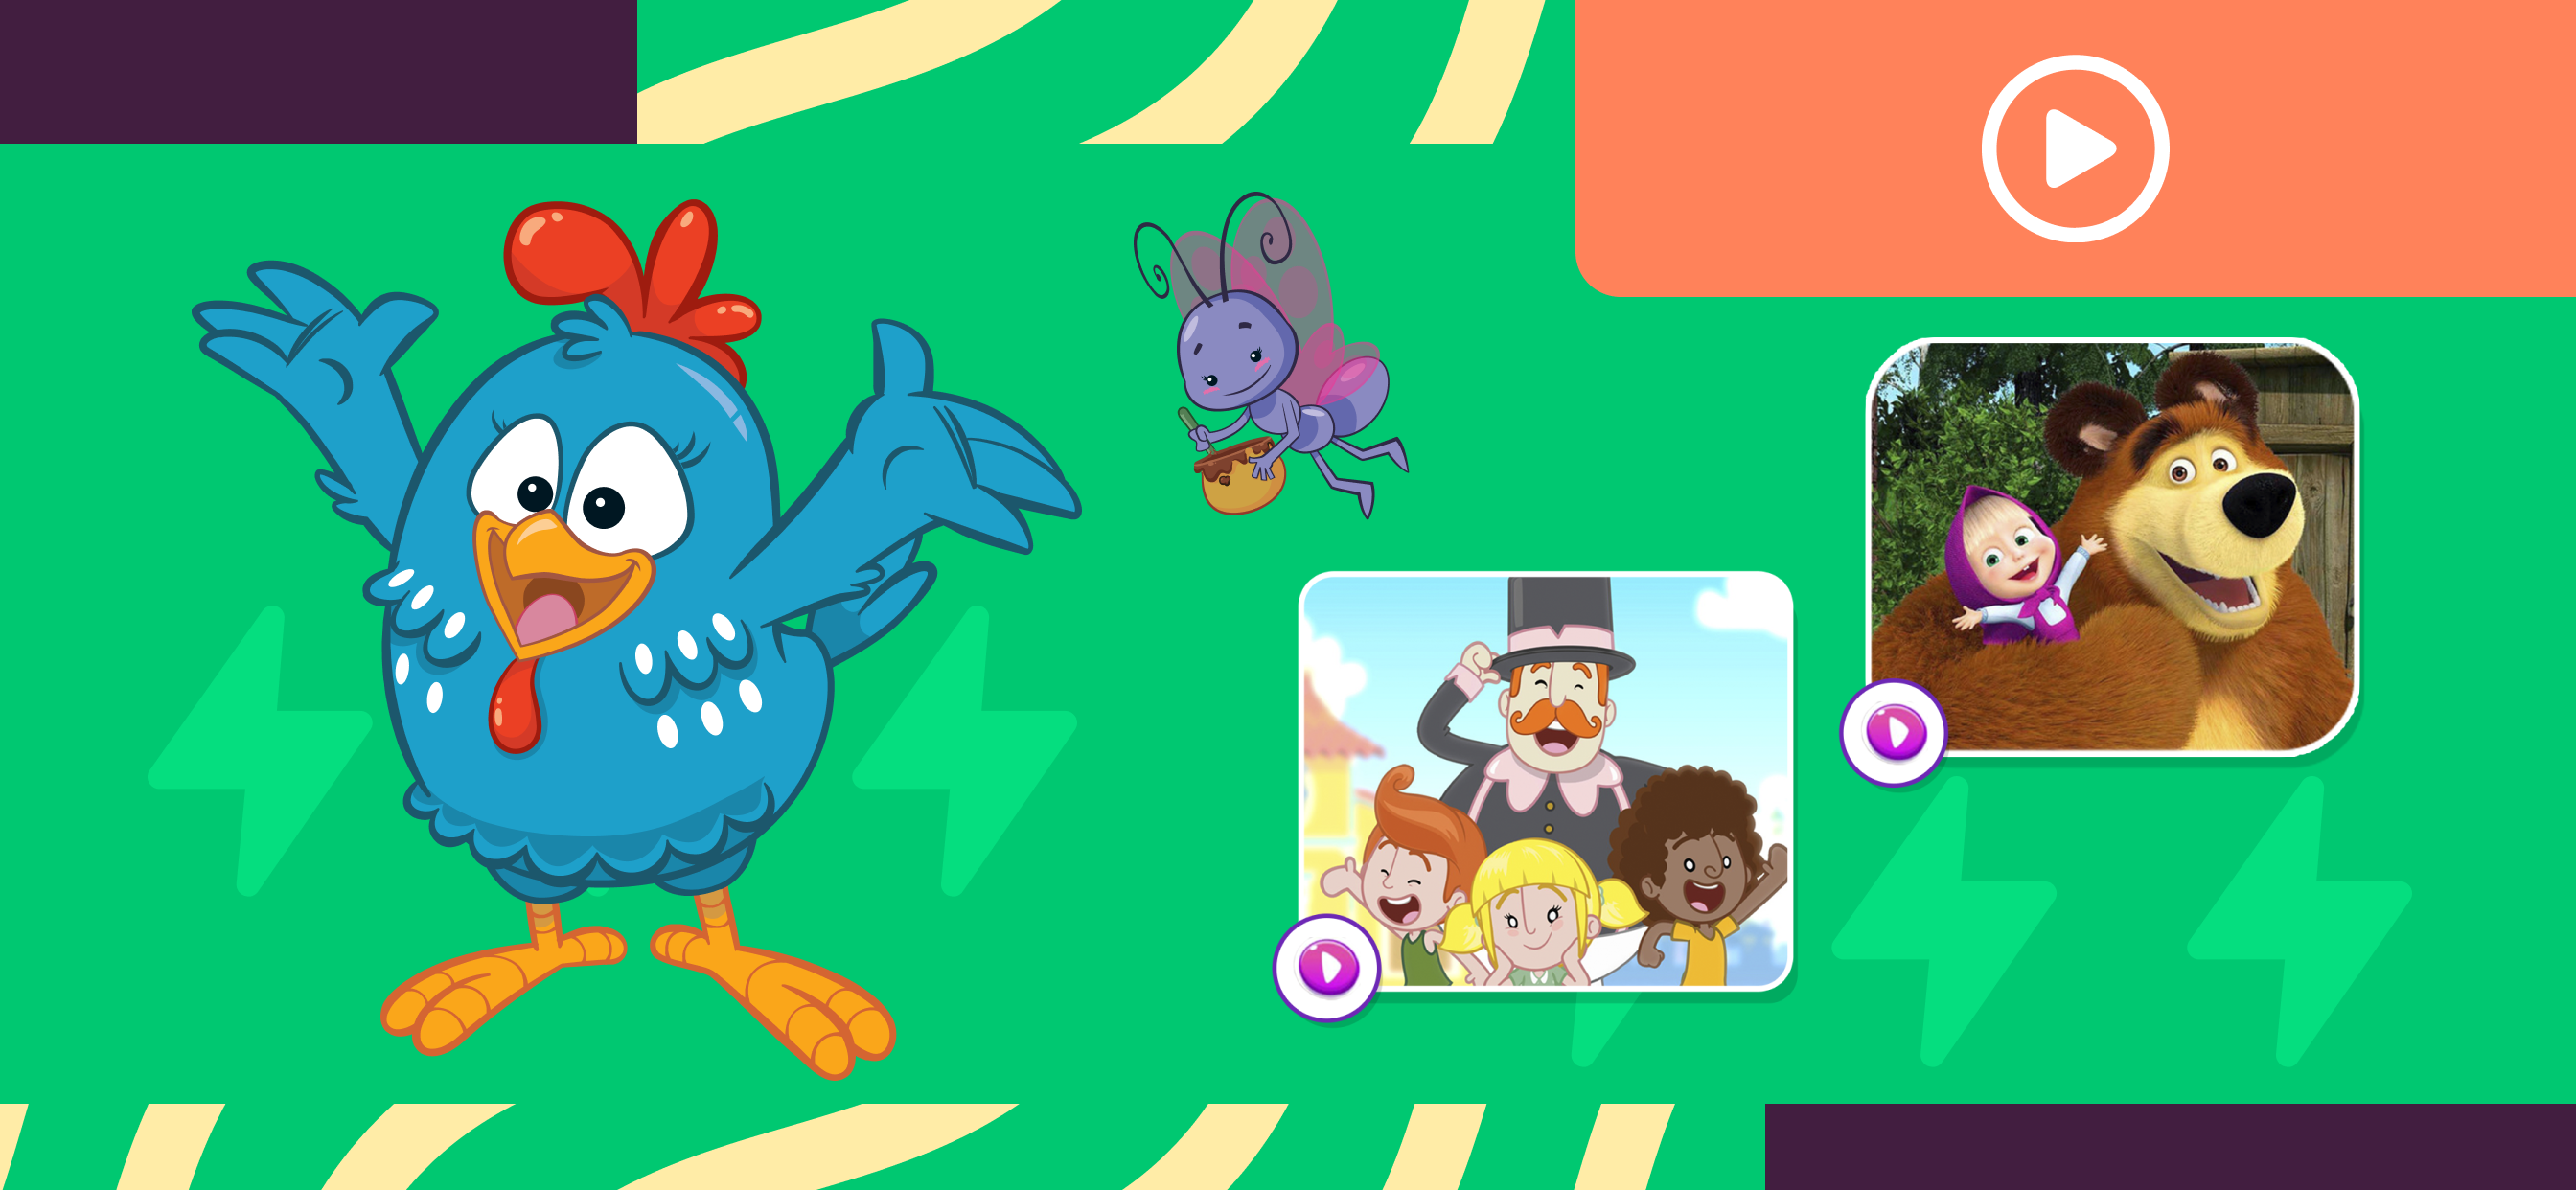 Android application PlayKids - Cartoons and Games screenshort